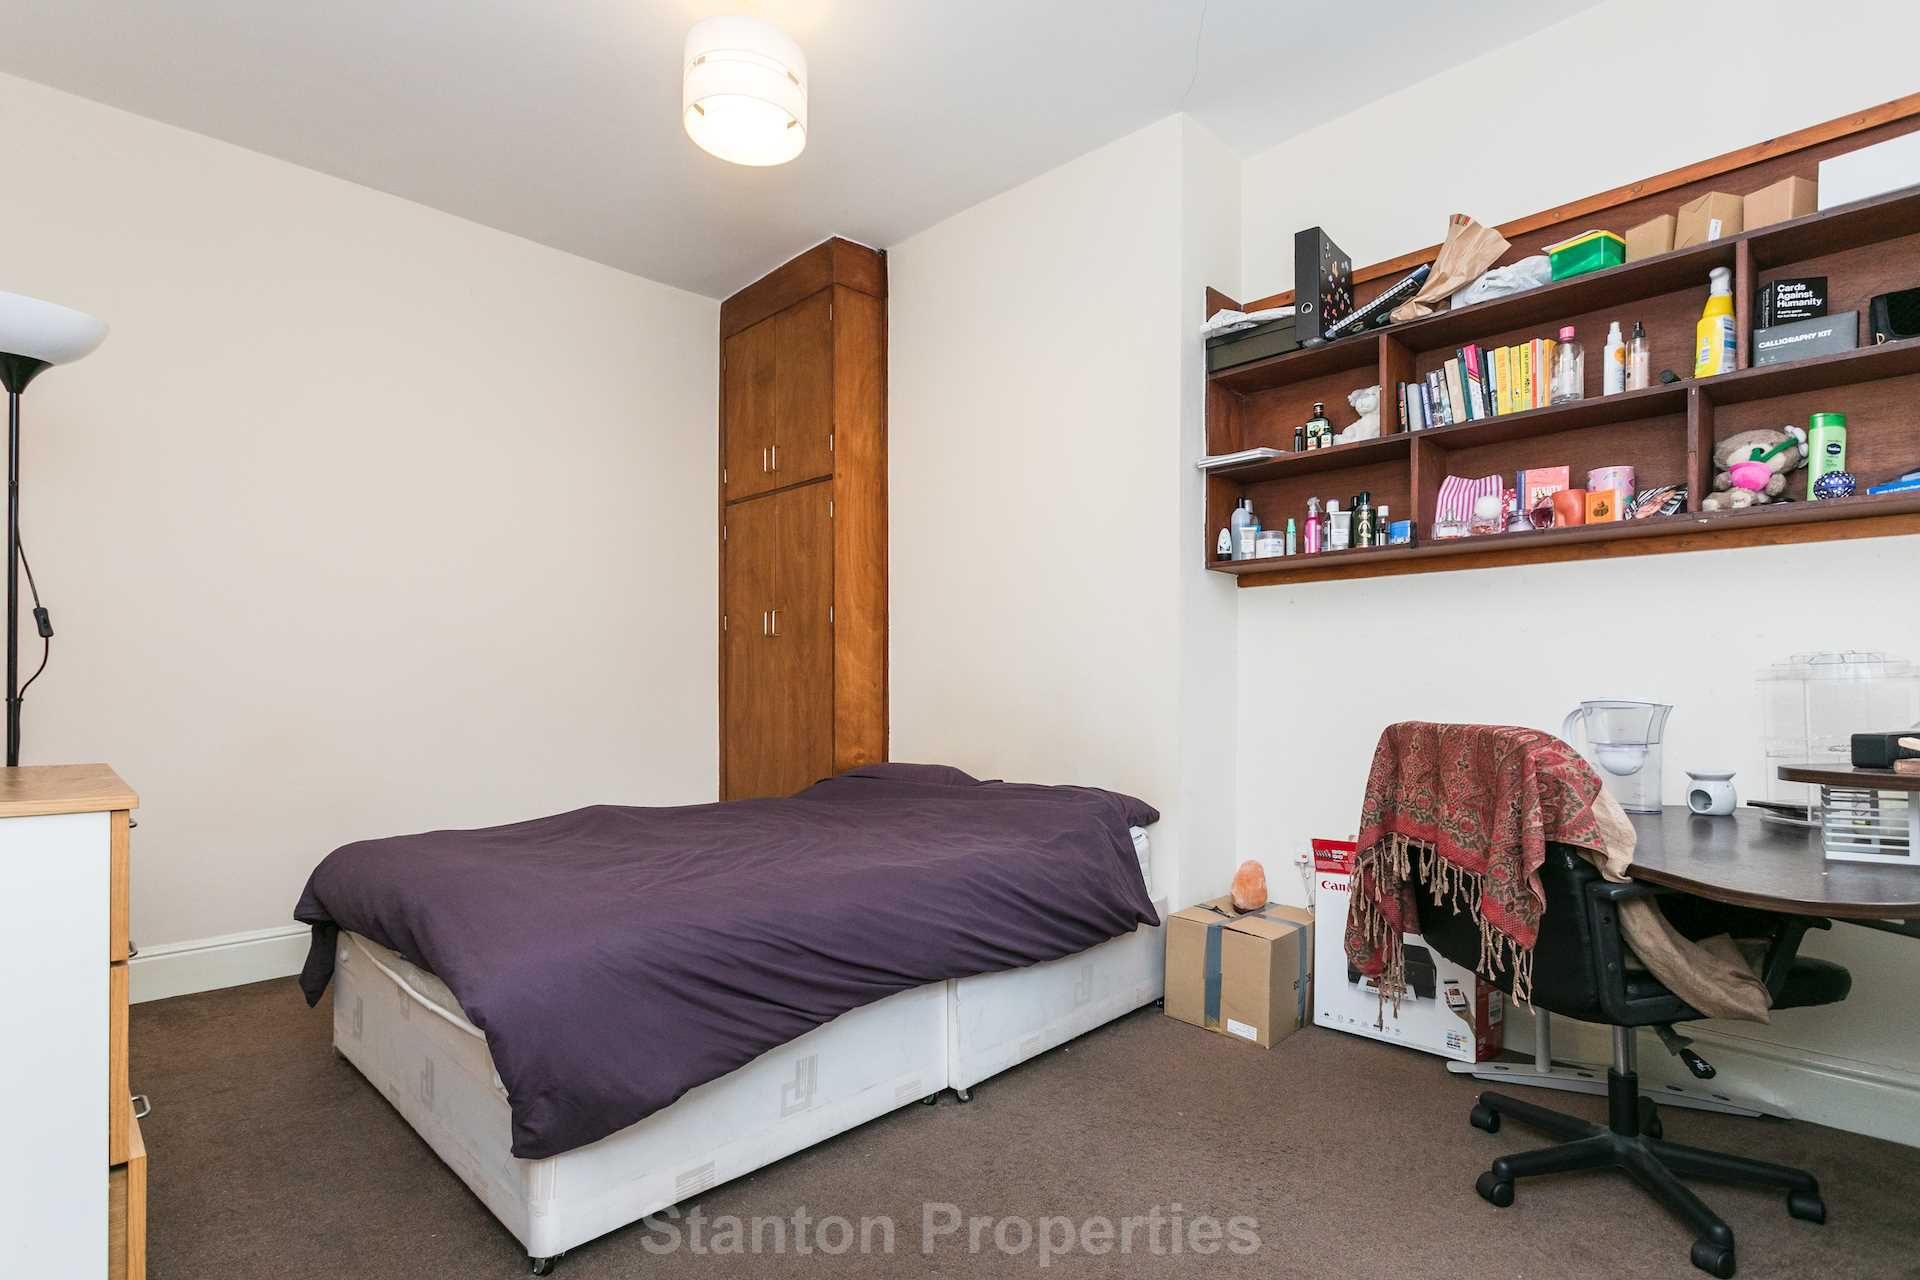 £112 pppw, Wallace Avenue, Rusholme, Image 14